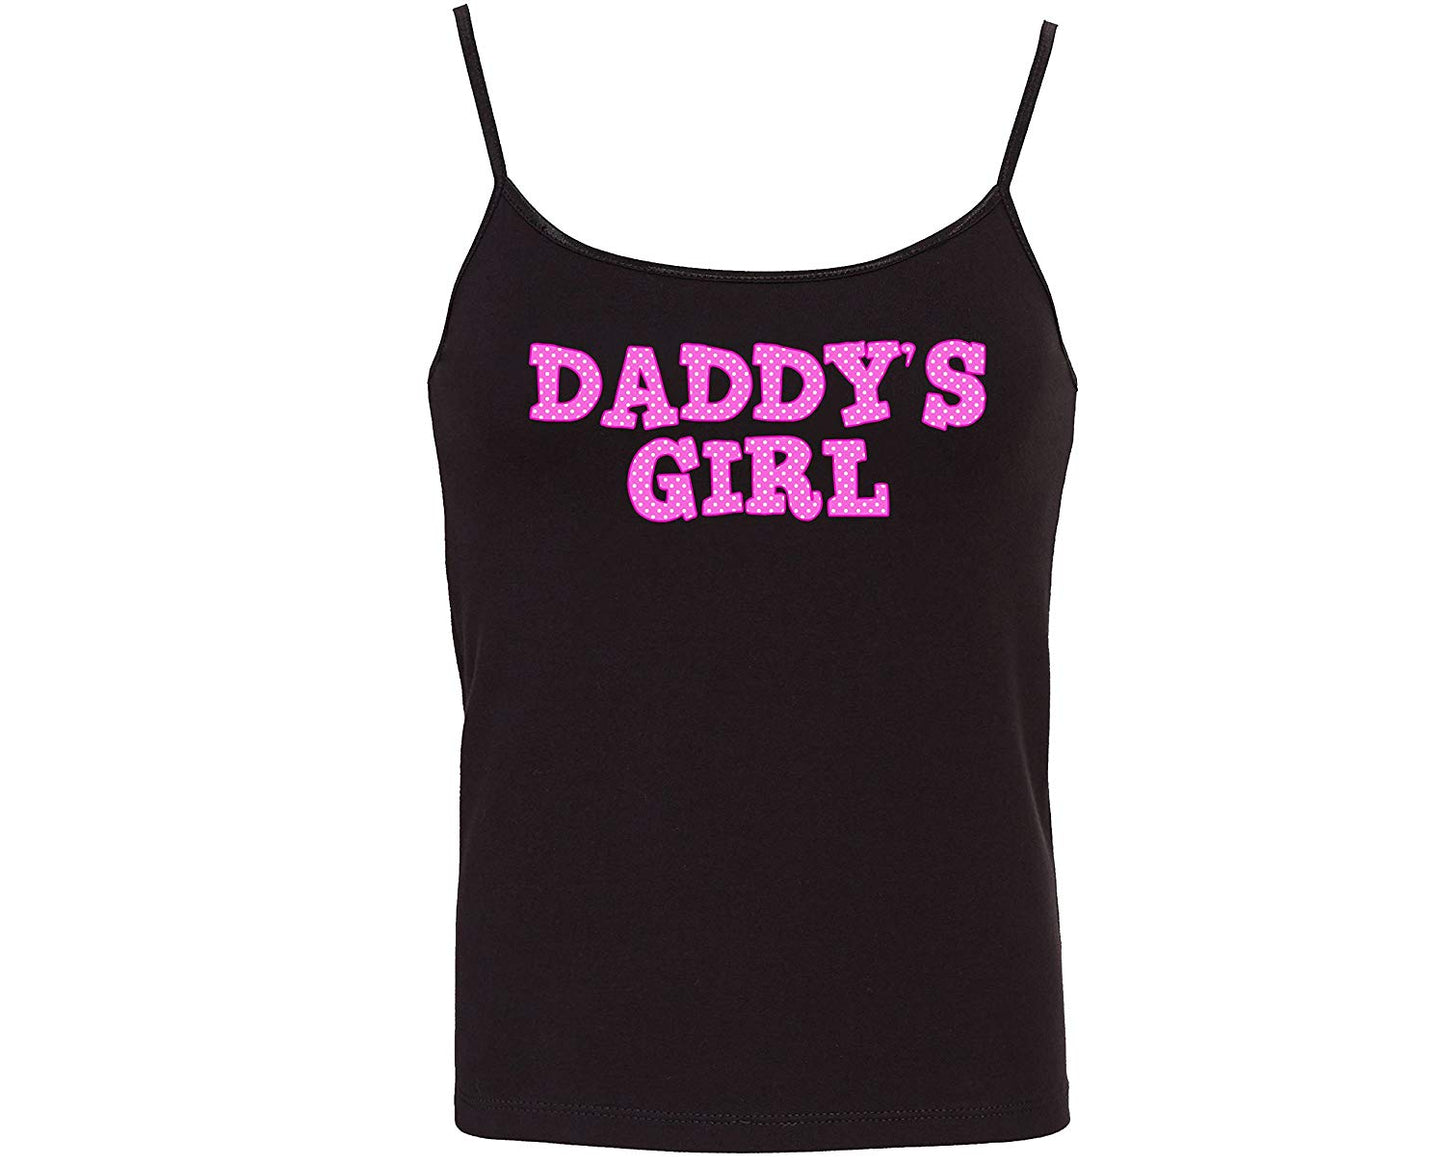 Knaughty Knickers Daddy's Girl Polka Dot Pink DDLG Black Camisole Cami Tank Top